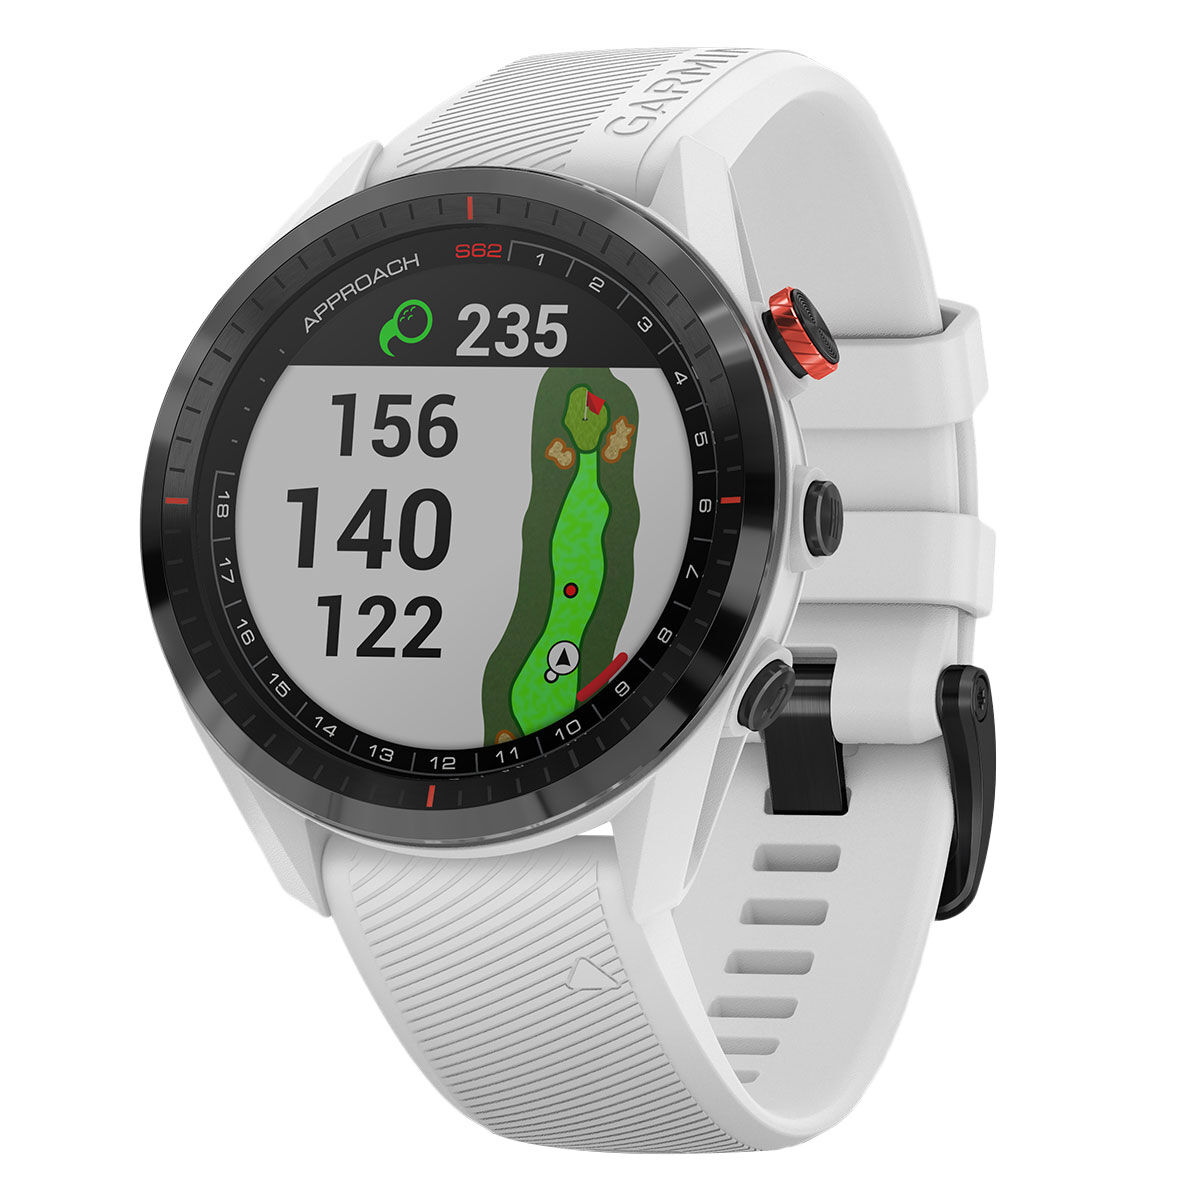 Garmin White and Black Approach S62 Golf GPS Watch, Size: One Size | American Golf